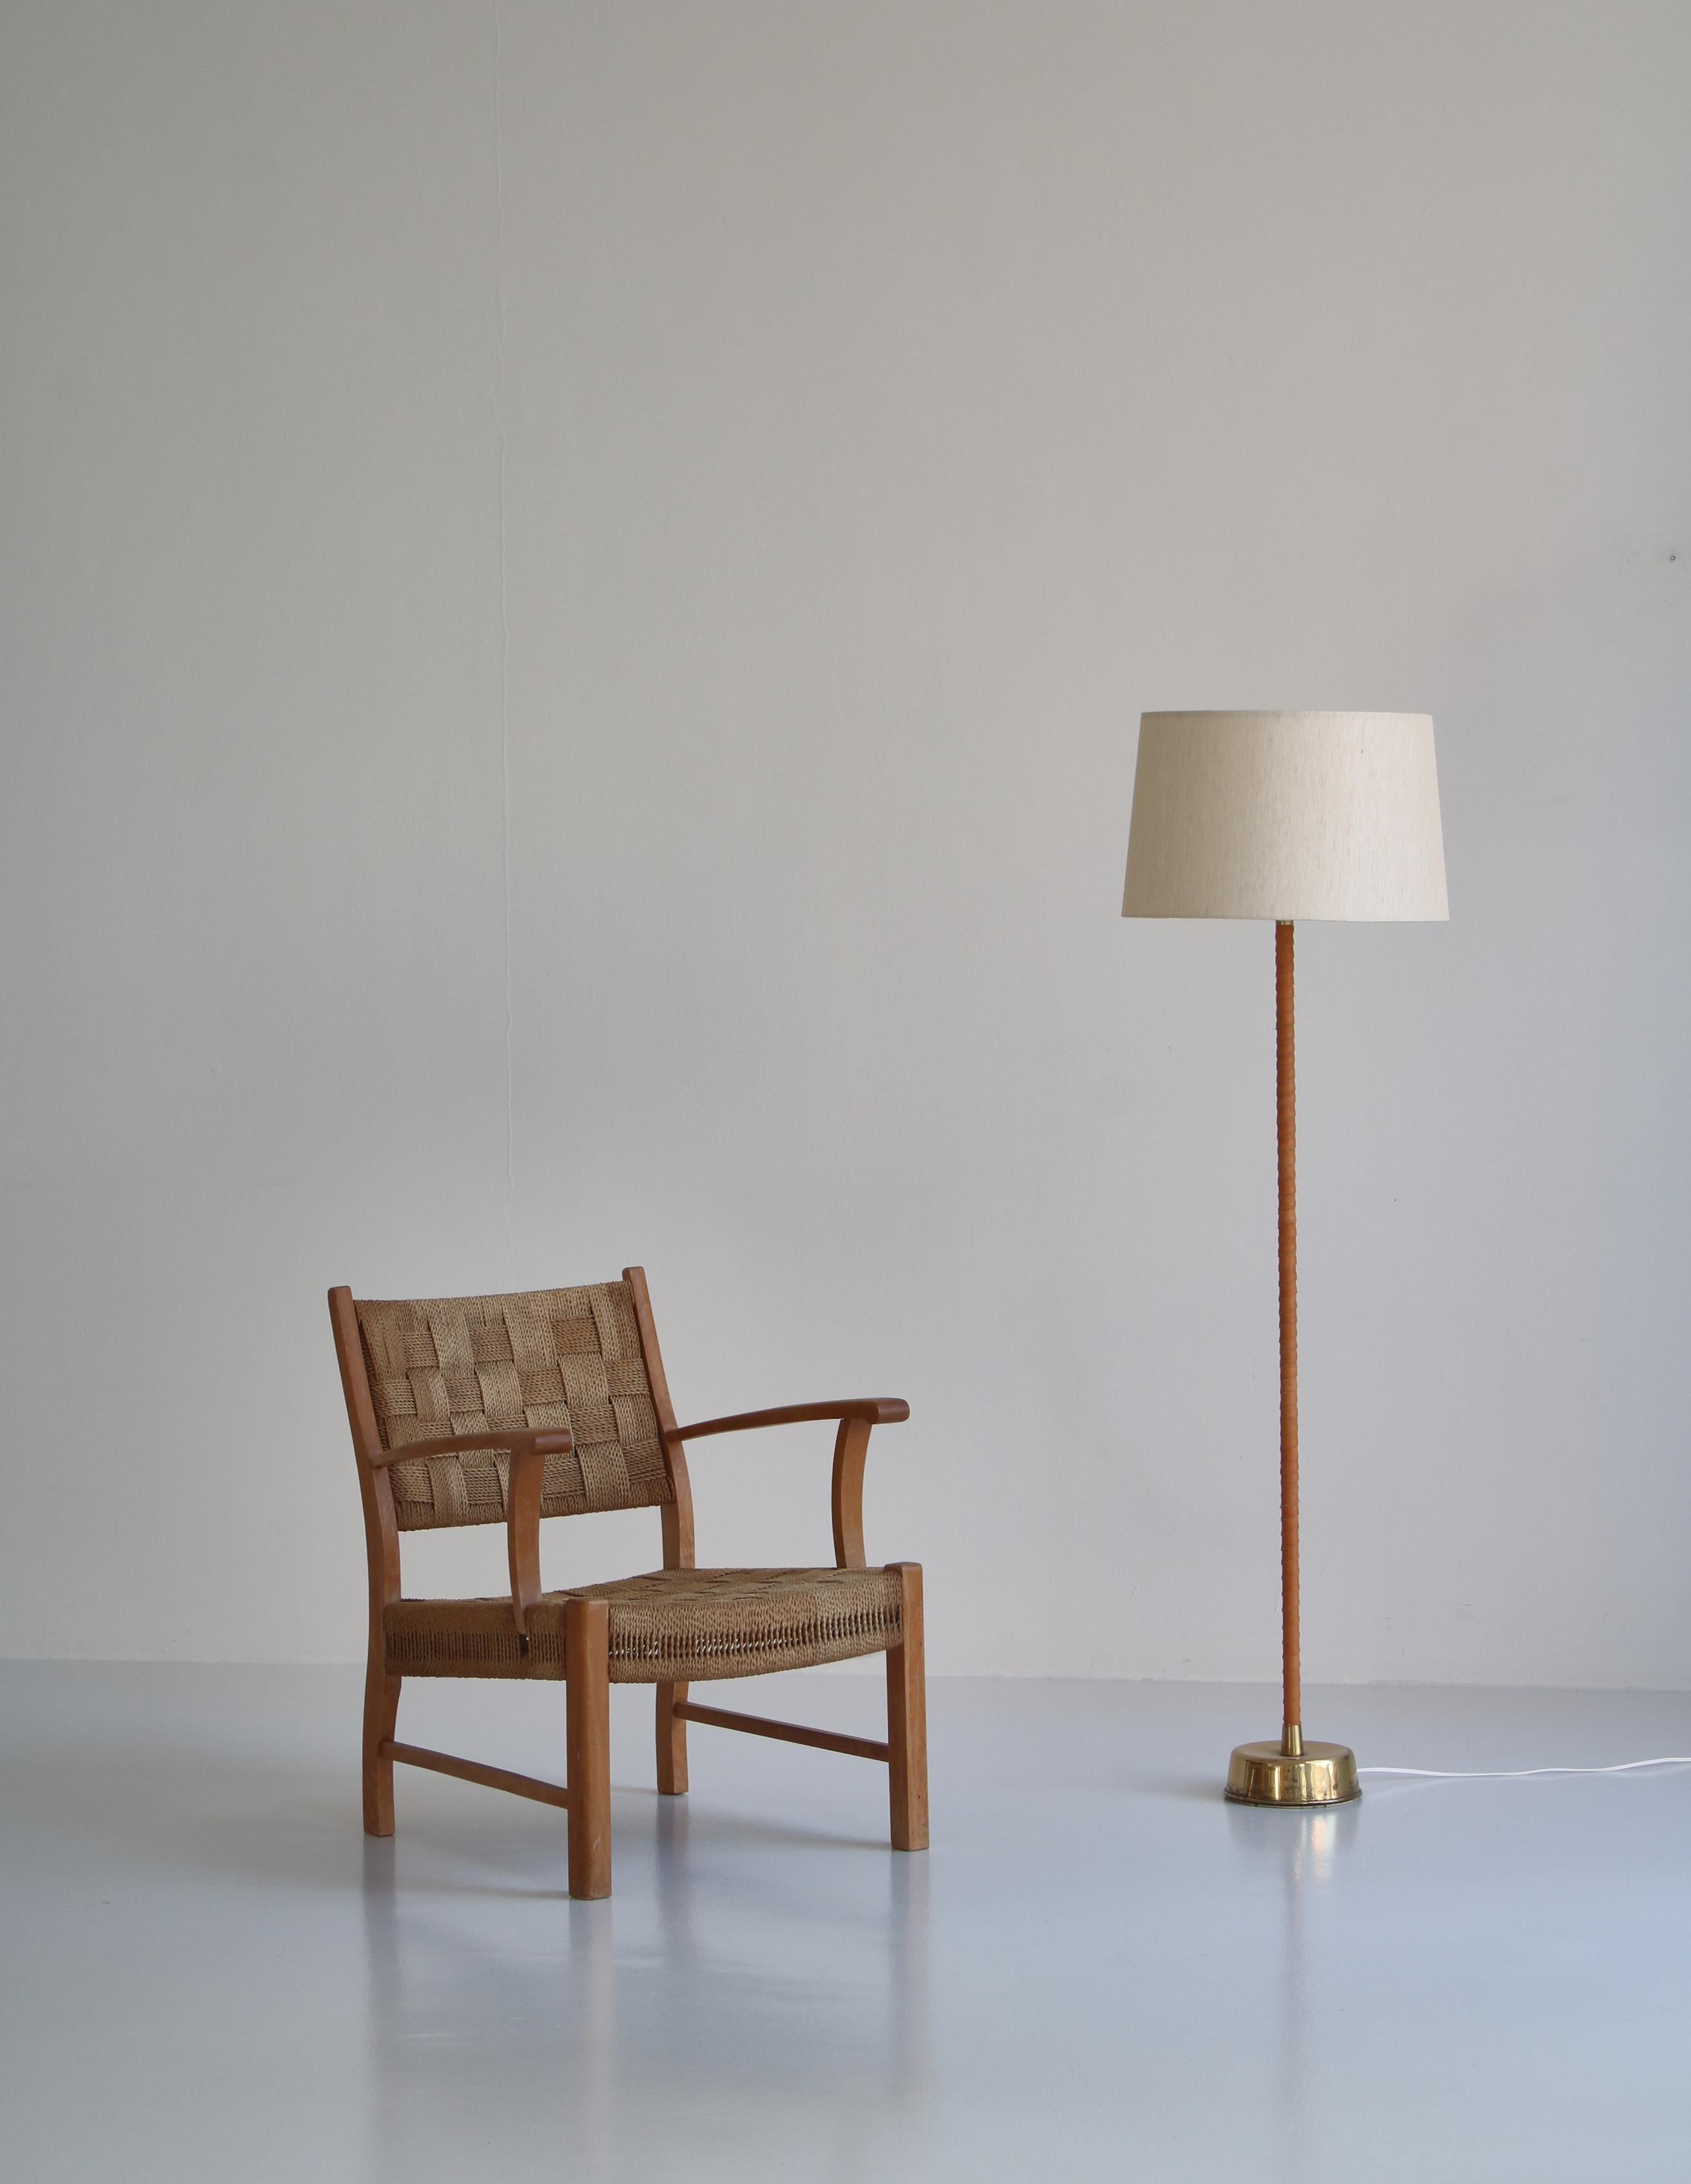 Rare early modernist armchair made at Fritz Hansen, Copenhagen in the 1930s. Attributed to Karl Schröder. Made in solid beechwood and woven seagrass.